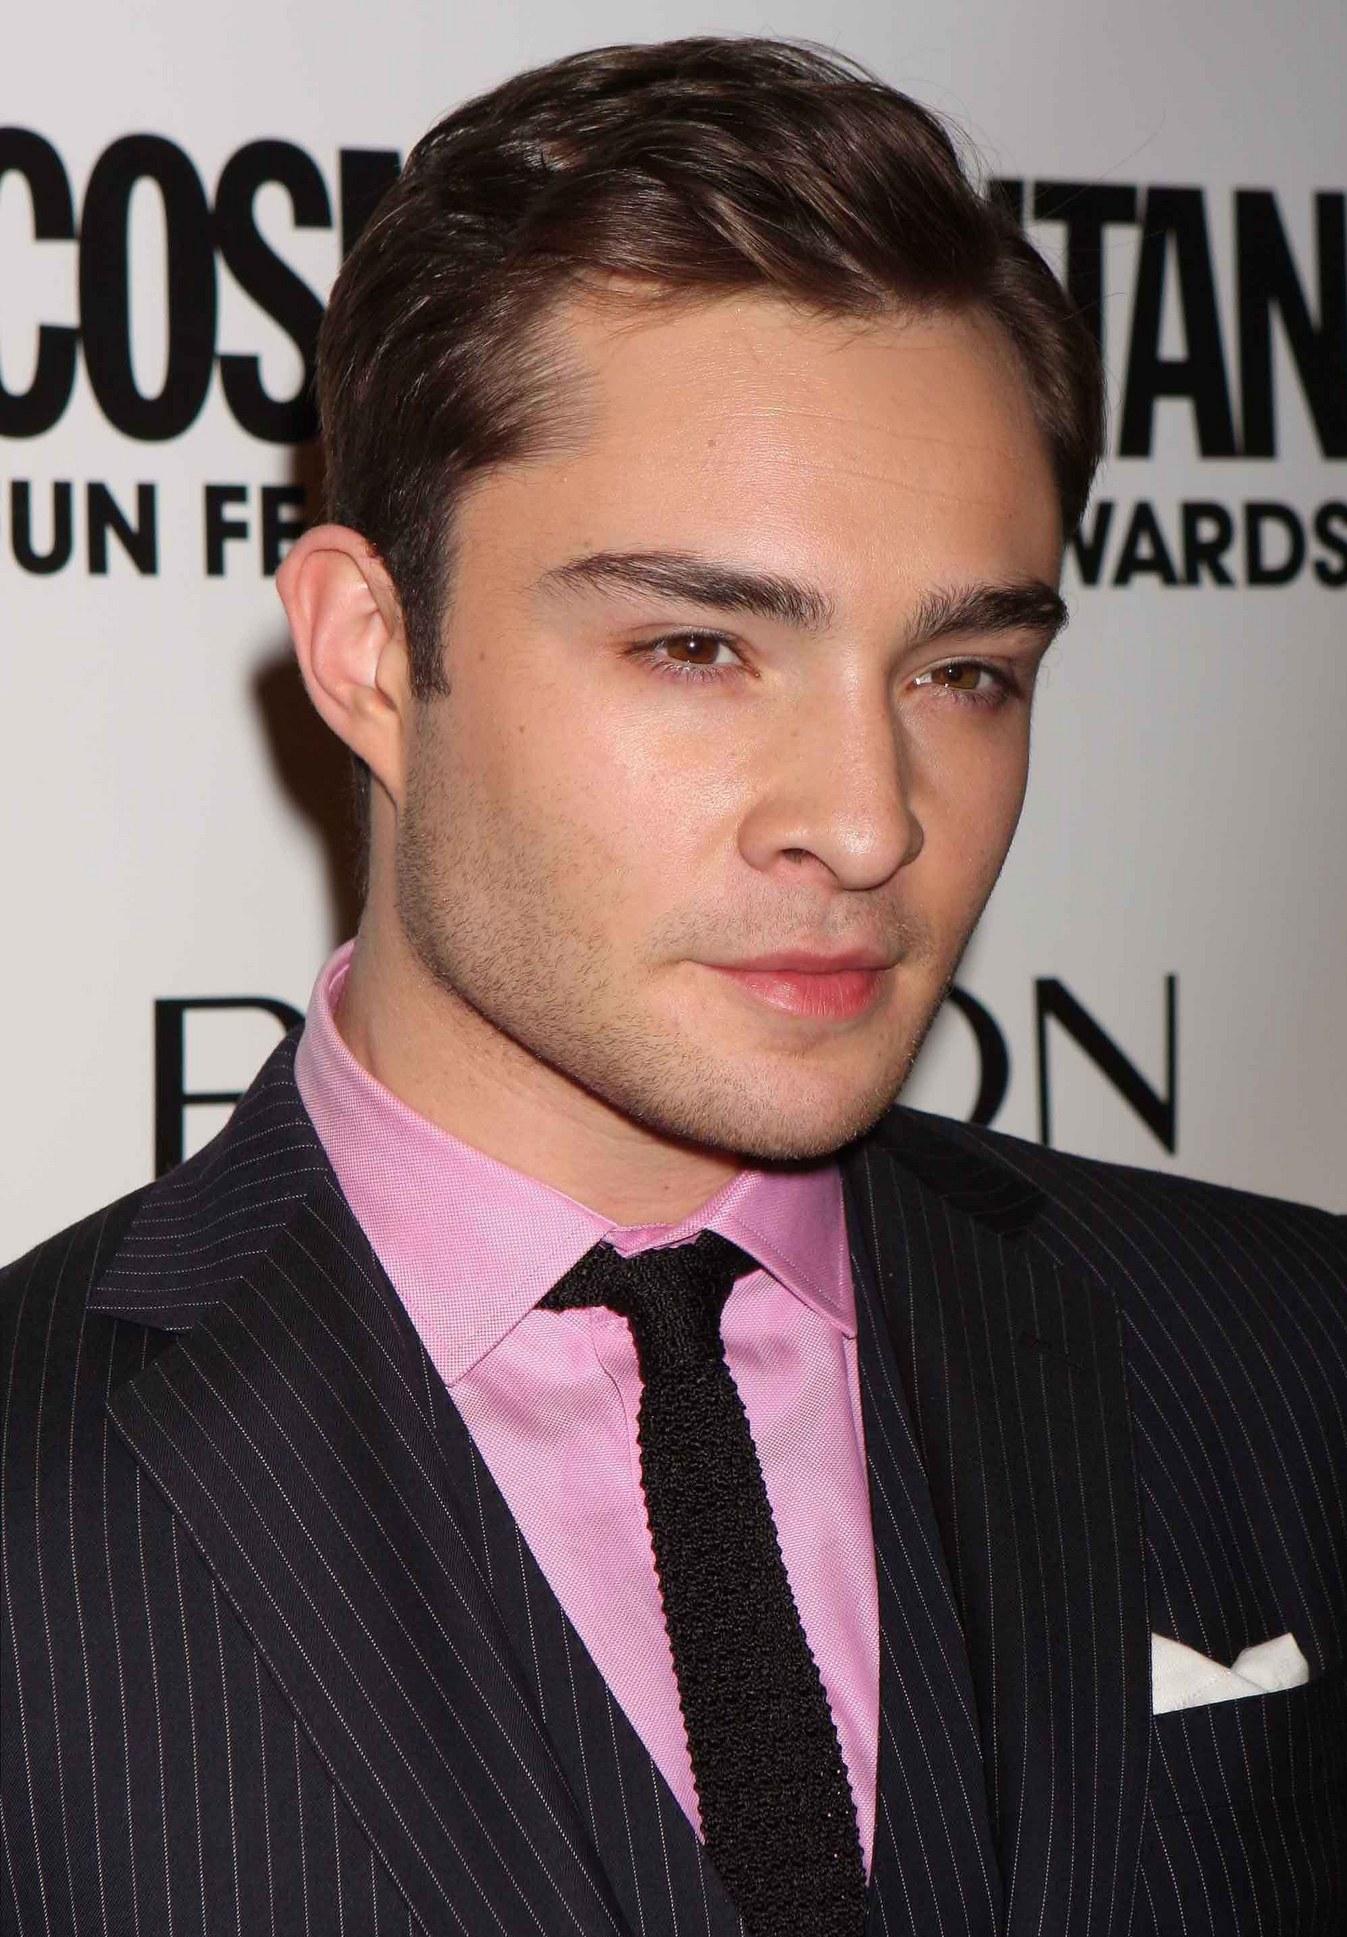 Ed Westwick photo 815 of 1473 pics, wallpaper - photo #535893 - ThePlace2